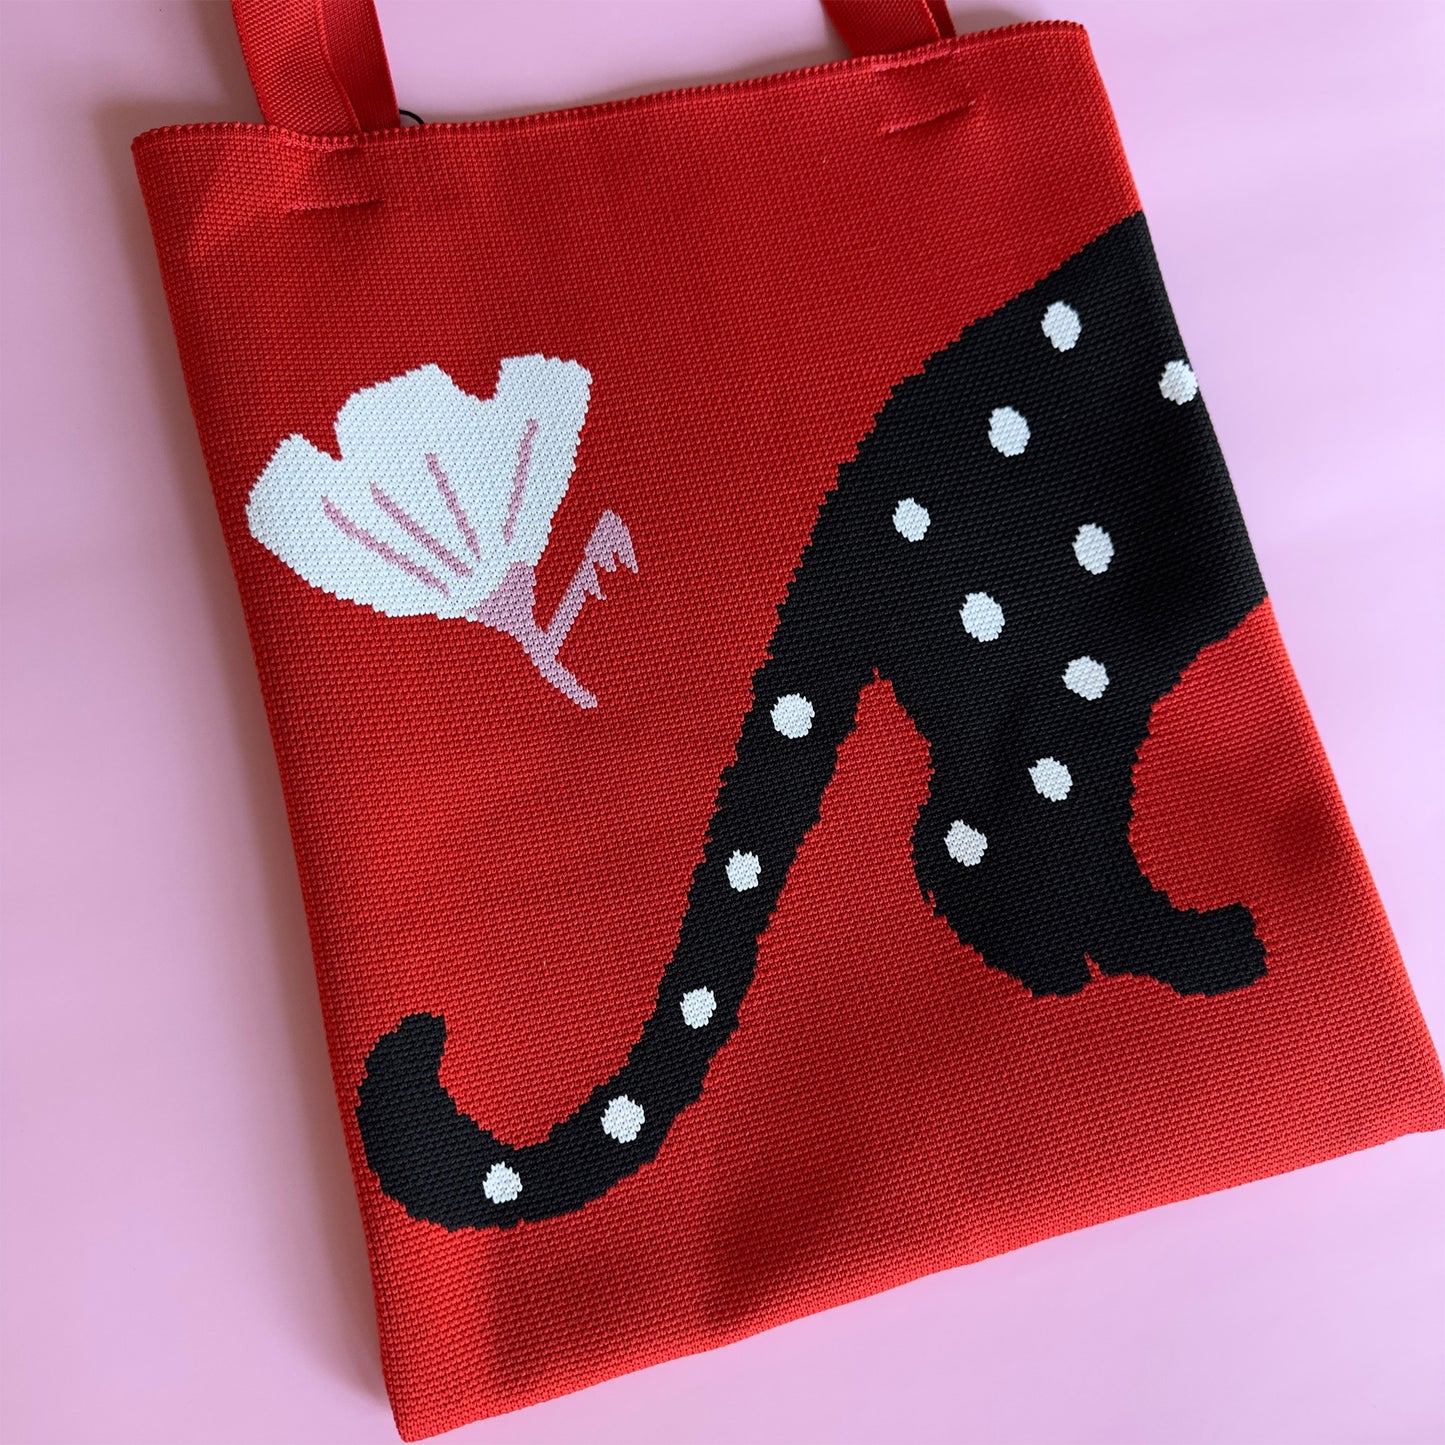 Polka cat with polka dots knit tote bag in red and black.